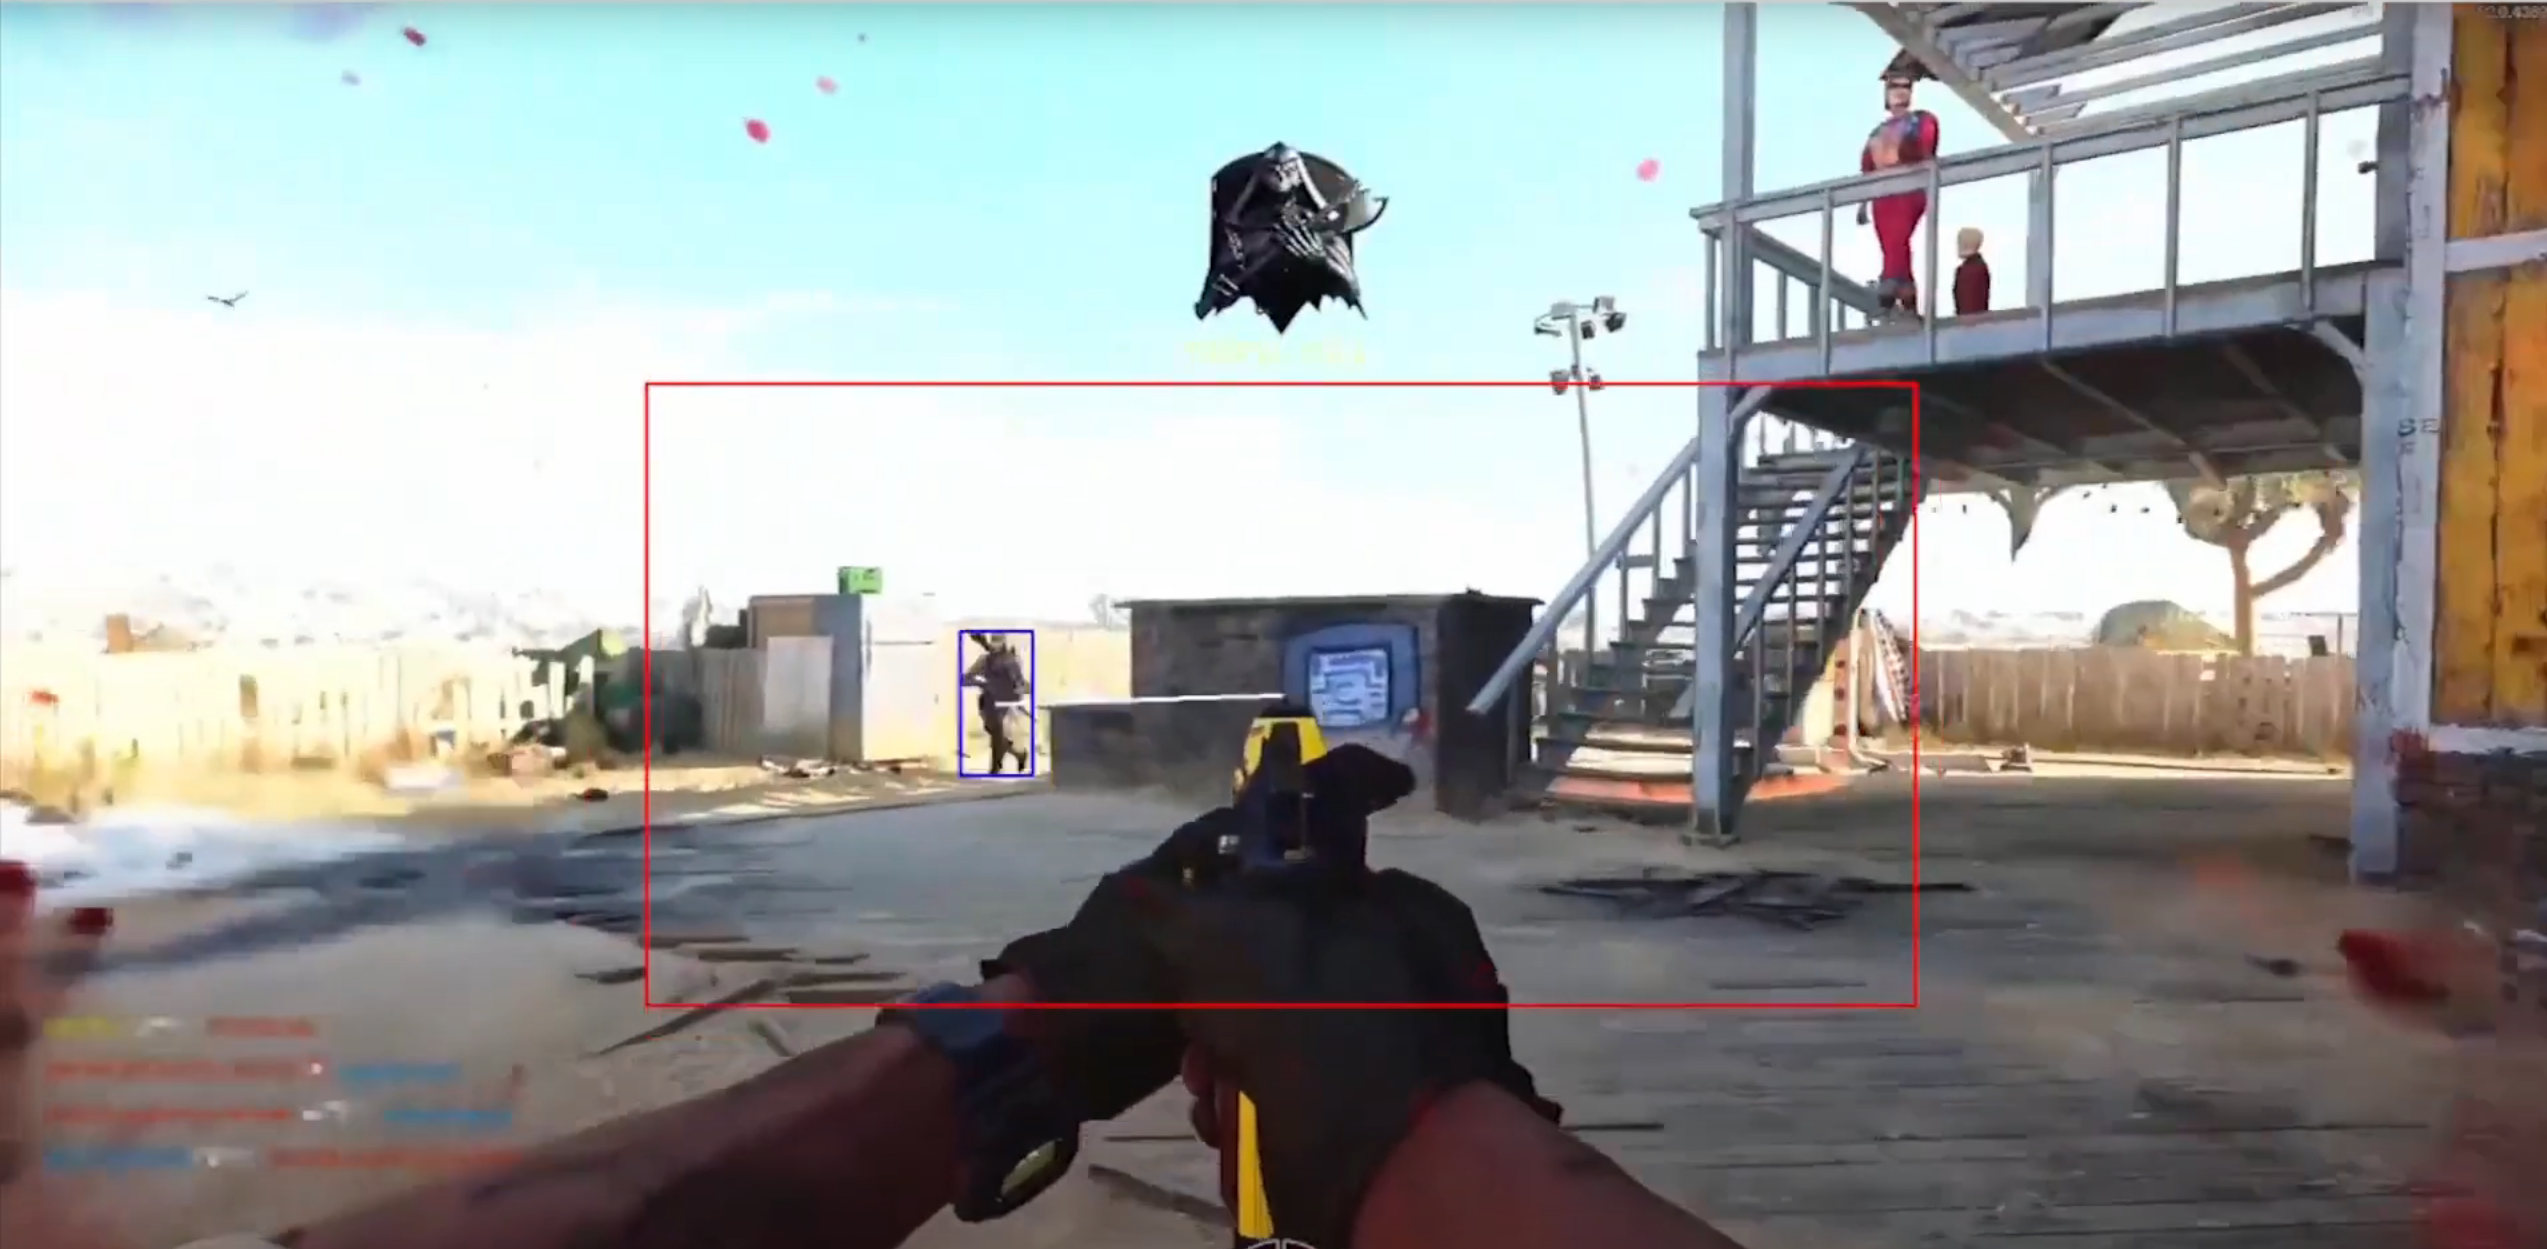 This real aimbot uses a physical mouse to cheat at shooting games